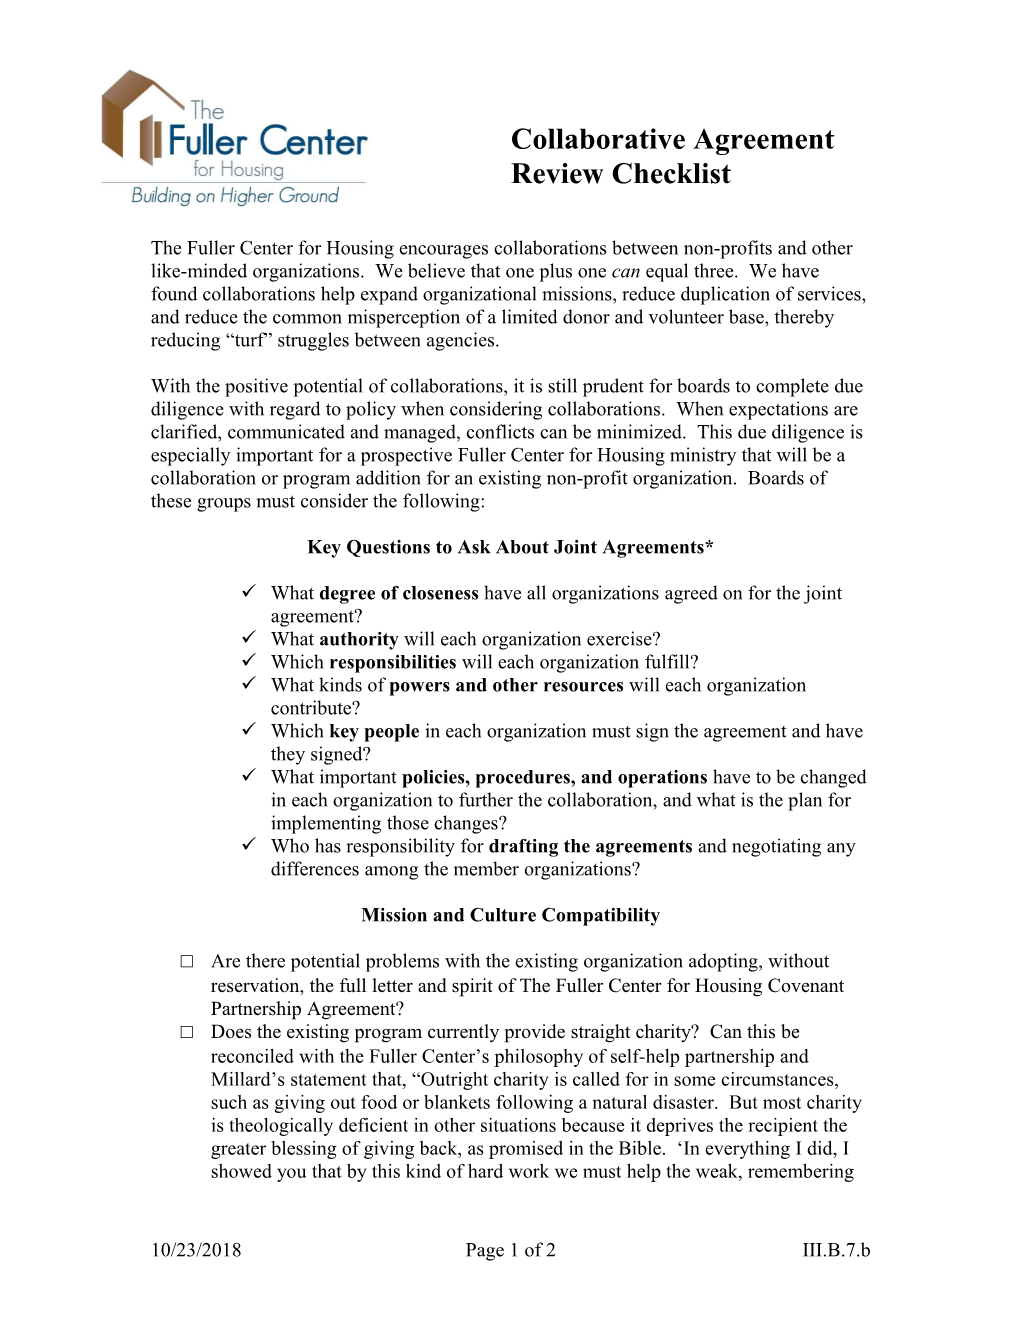 Collaborative Agreement Review Checklist